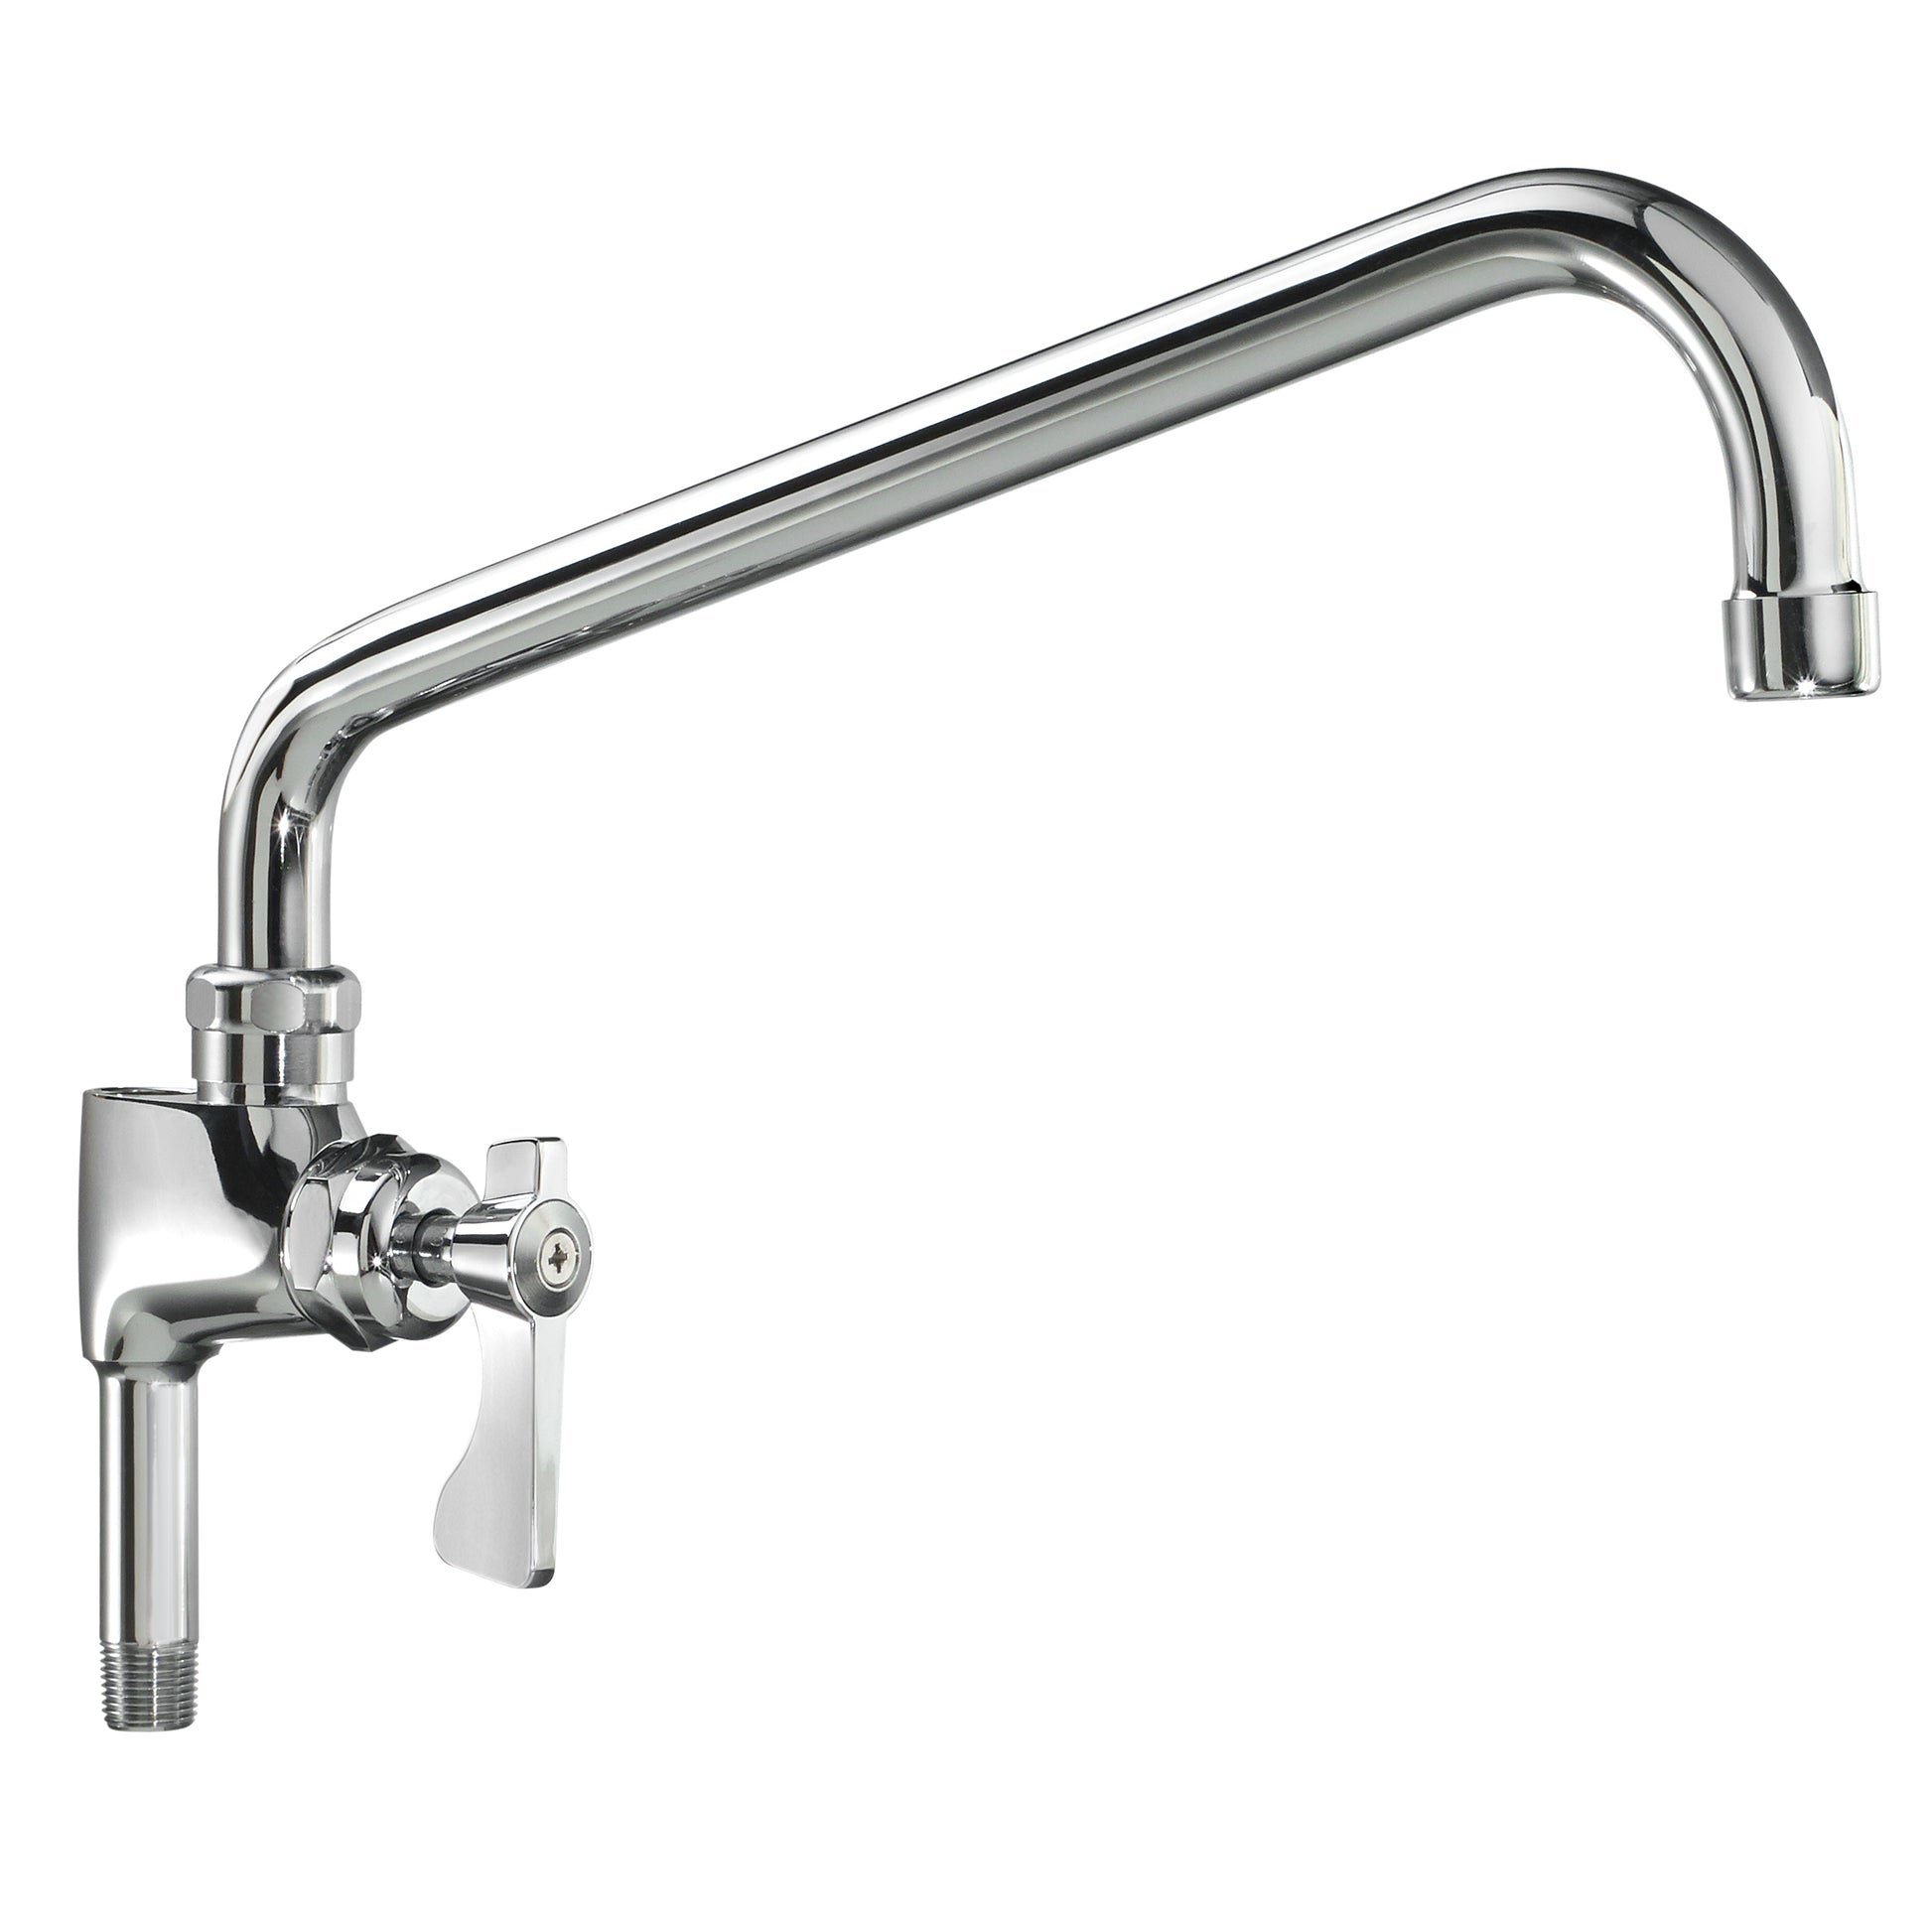 Krowne 21-139L. Royal Series Add-on Faucet with 12" Spout for  Pre-rinse.